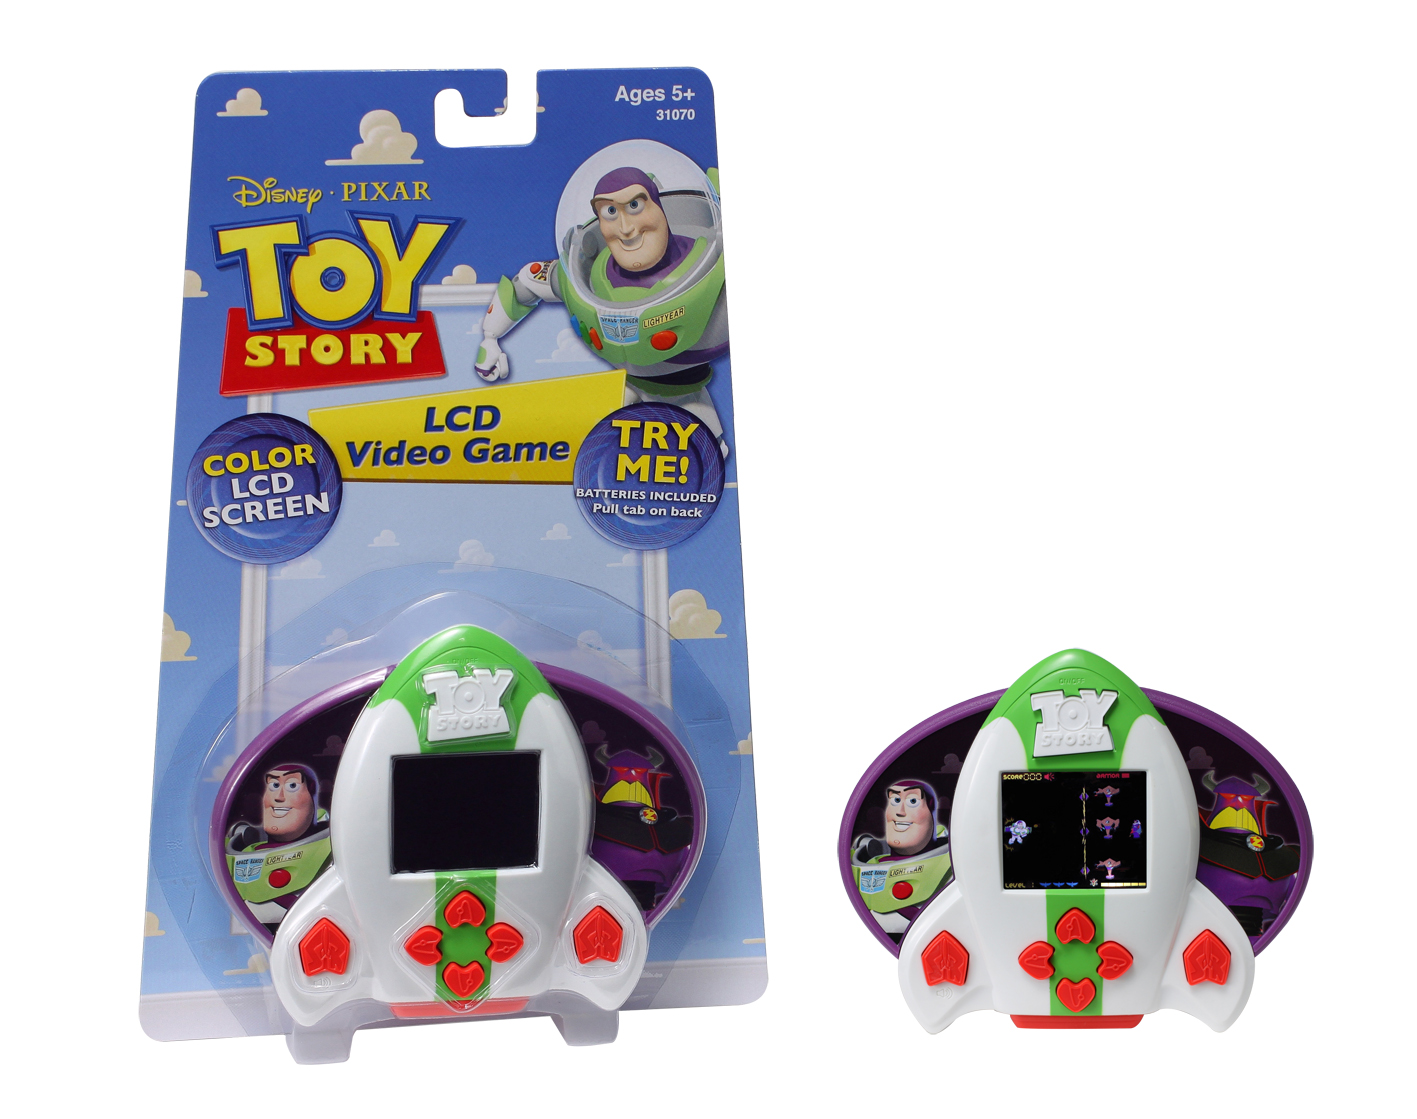 download toy story buzz lightyear